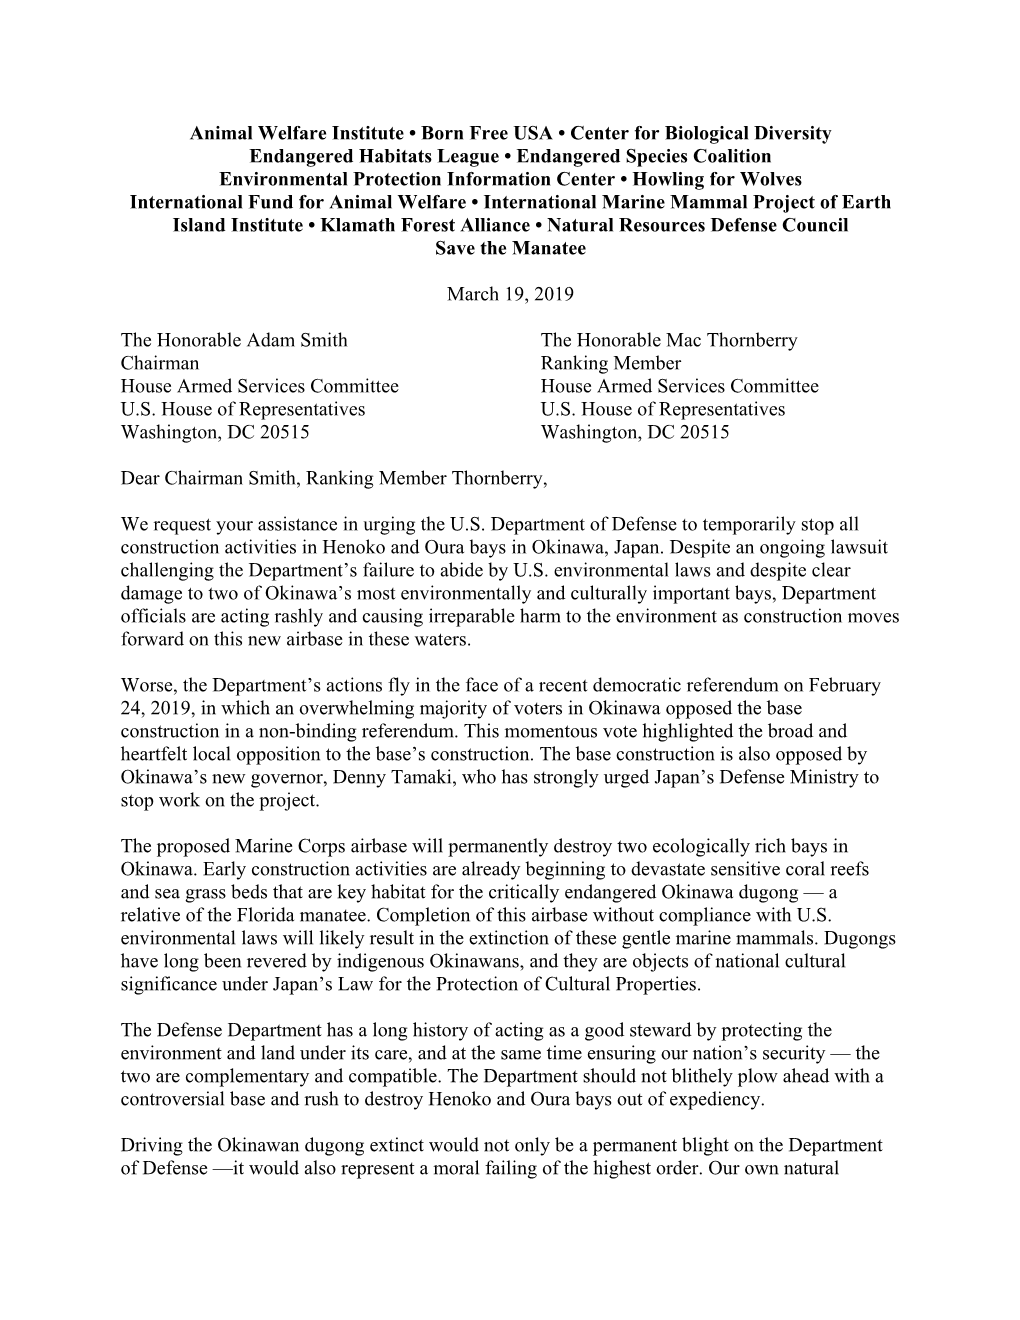 Letter to House Armed Services Committee Regarding Okinawa